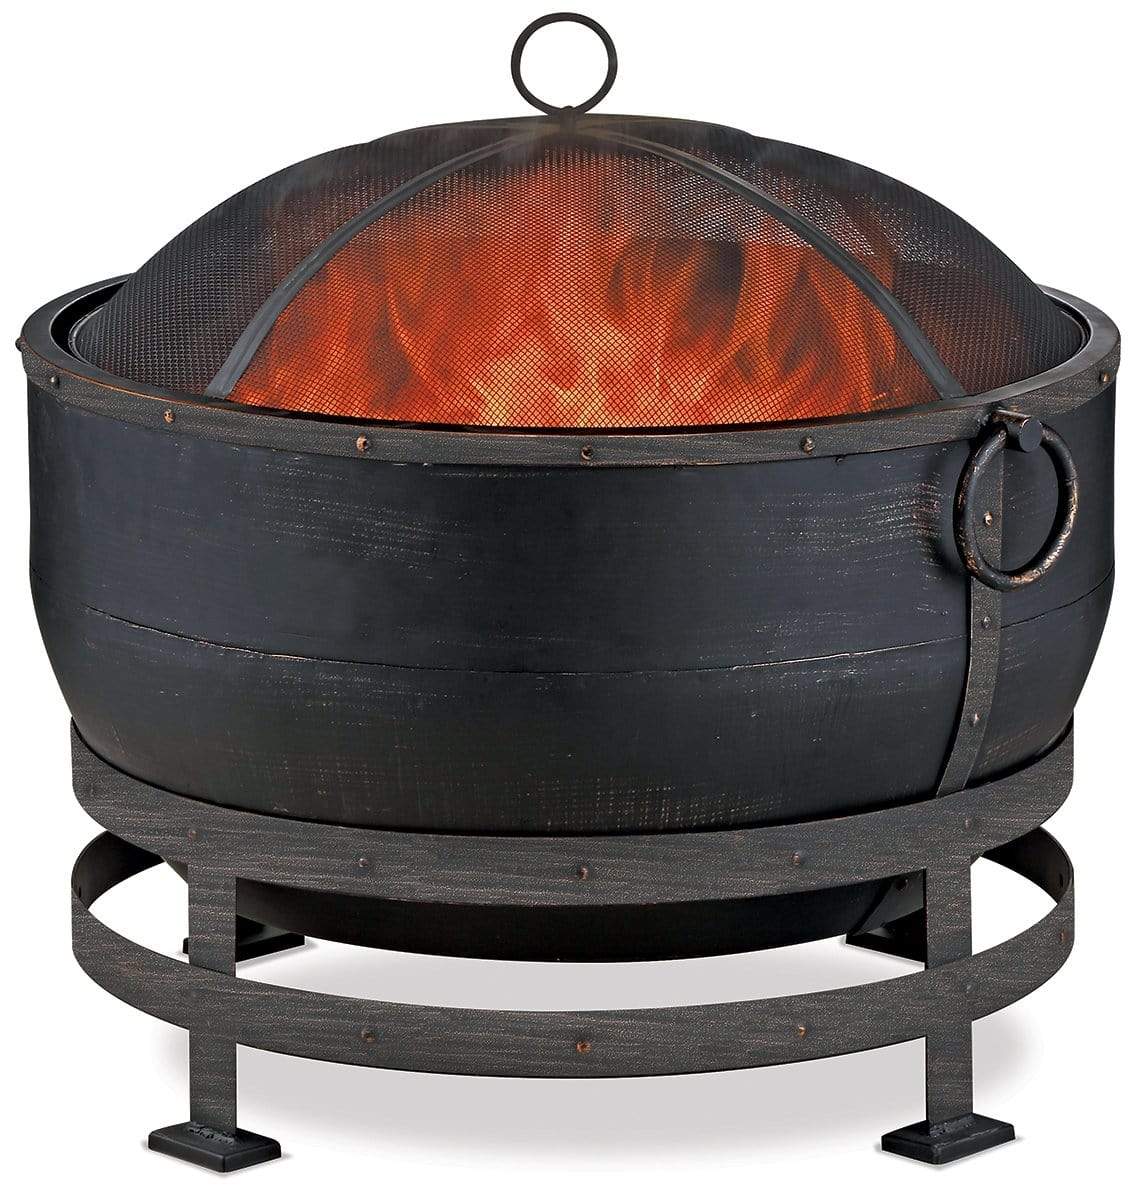 Endless Summer Fire Pit OIL RUBBED BRONZE WOOD BURNING OUTDOOR FIREBOWL WITH KETTLE DESIGN